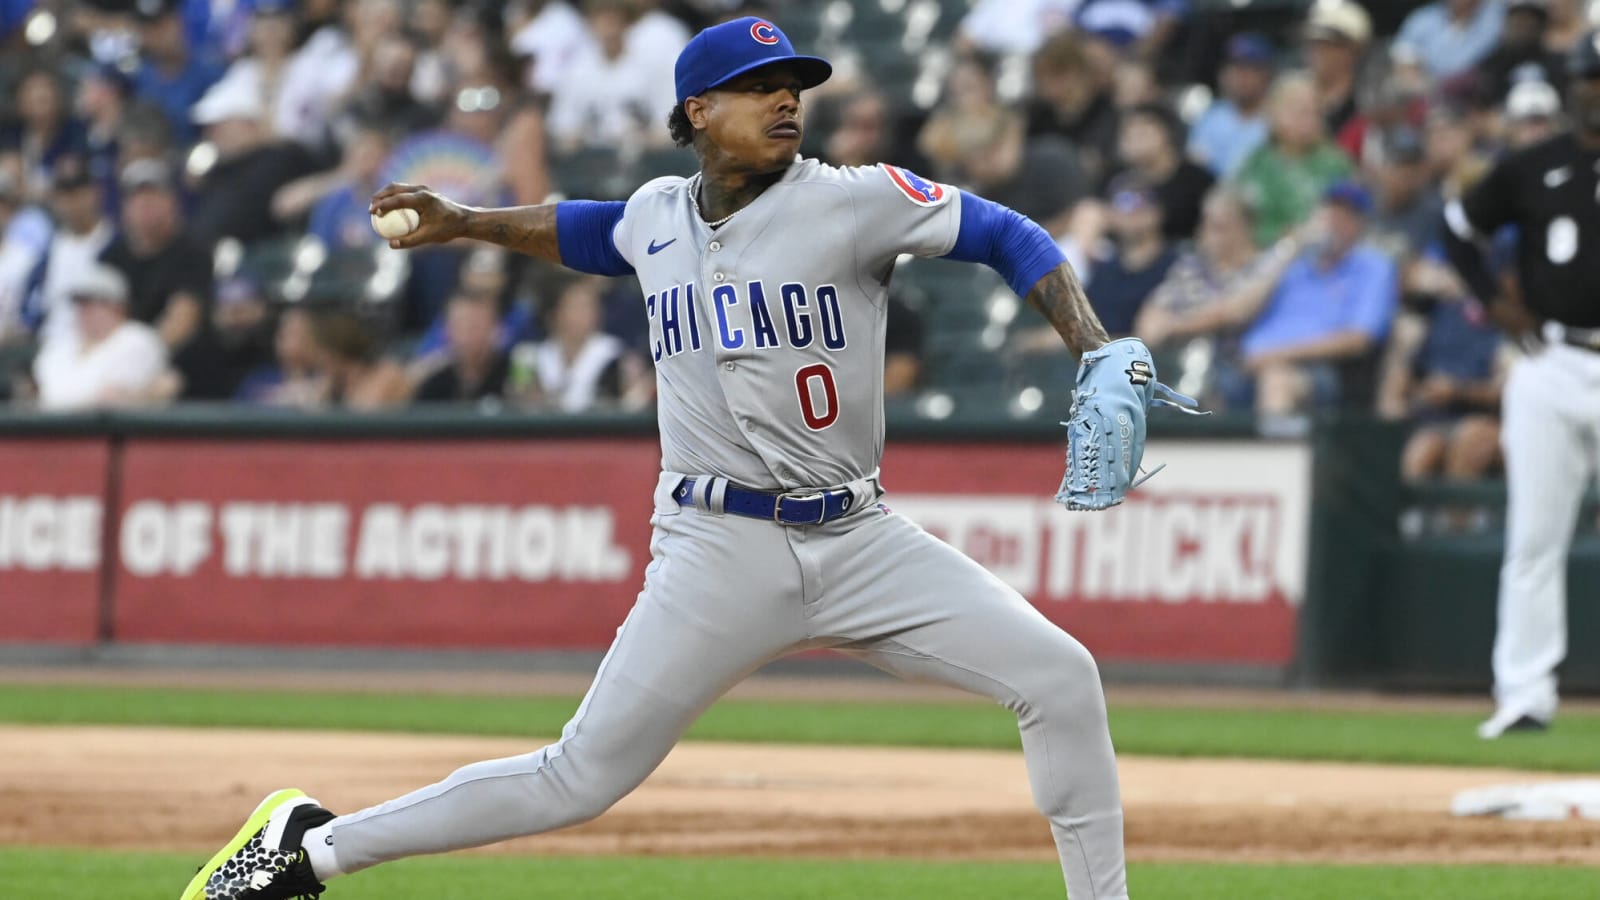 Cubs Injury Updates: Stroman Throws Live BP, Hughes Making Comeback, and More